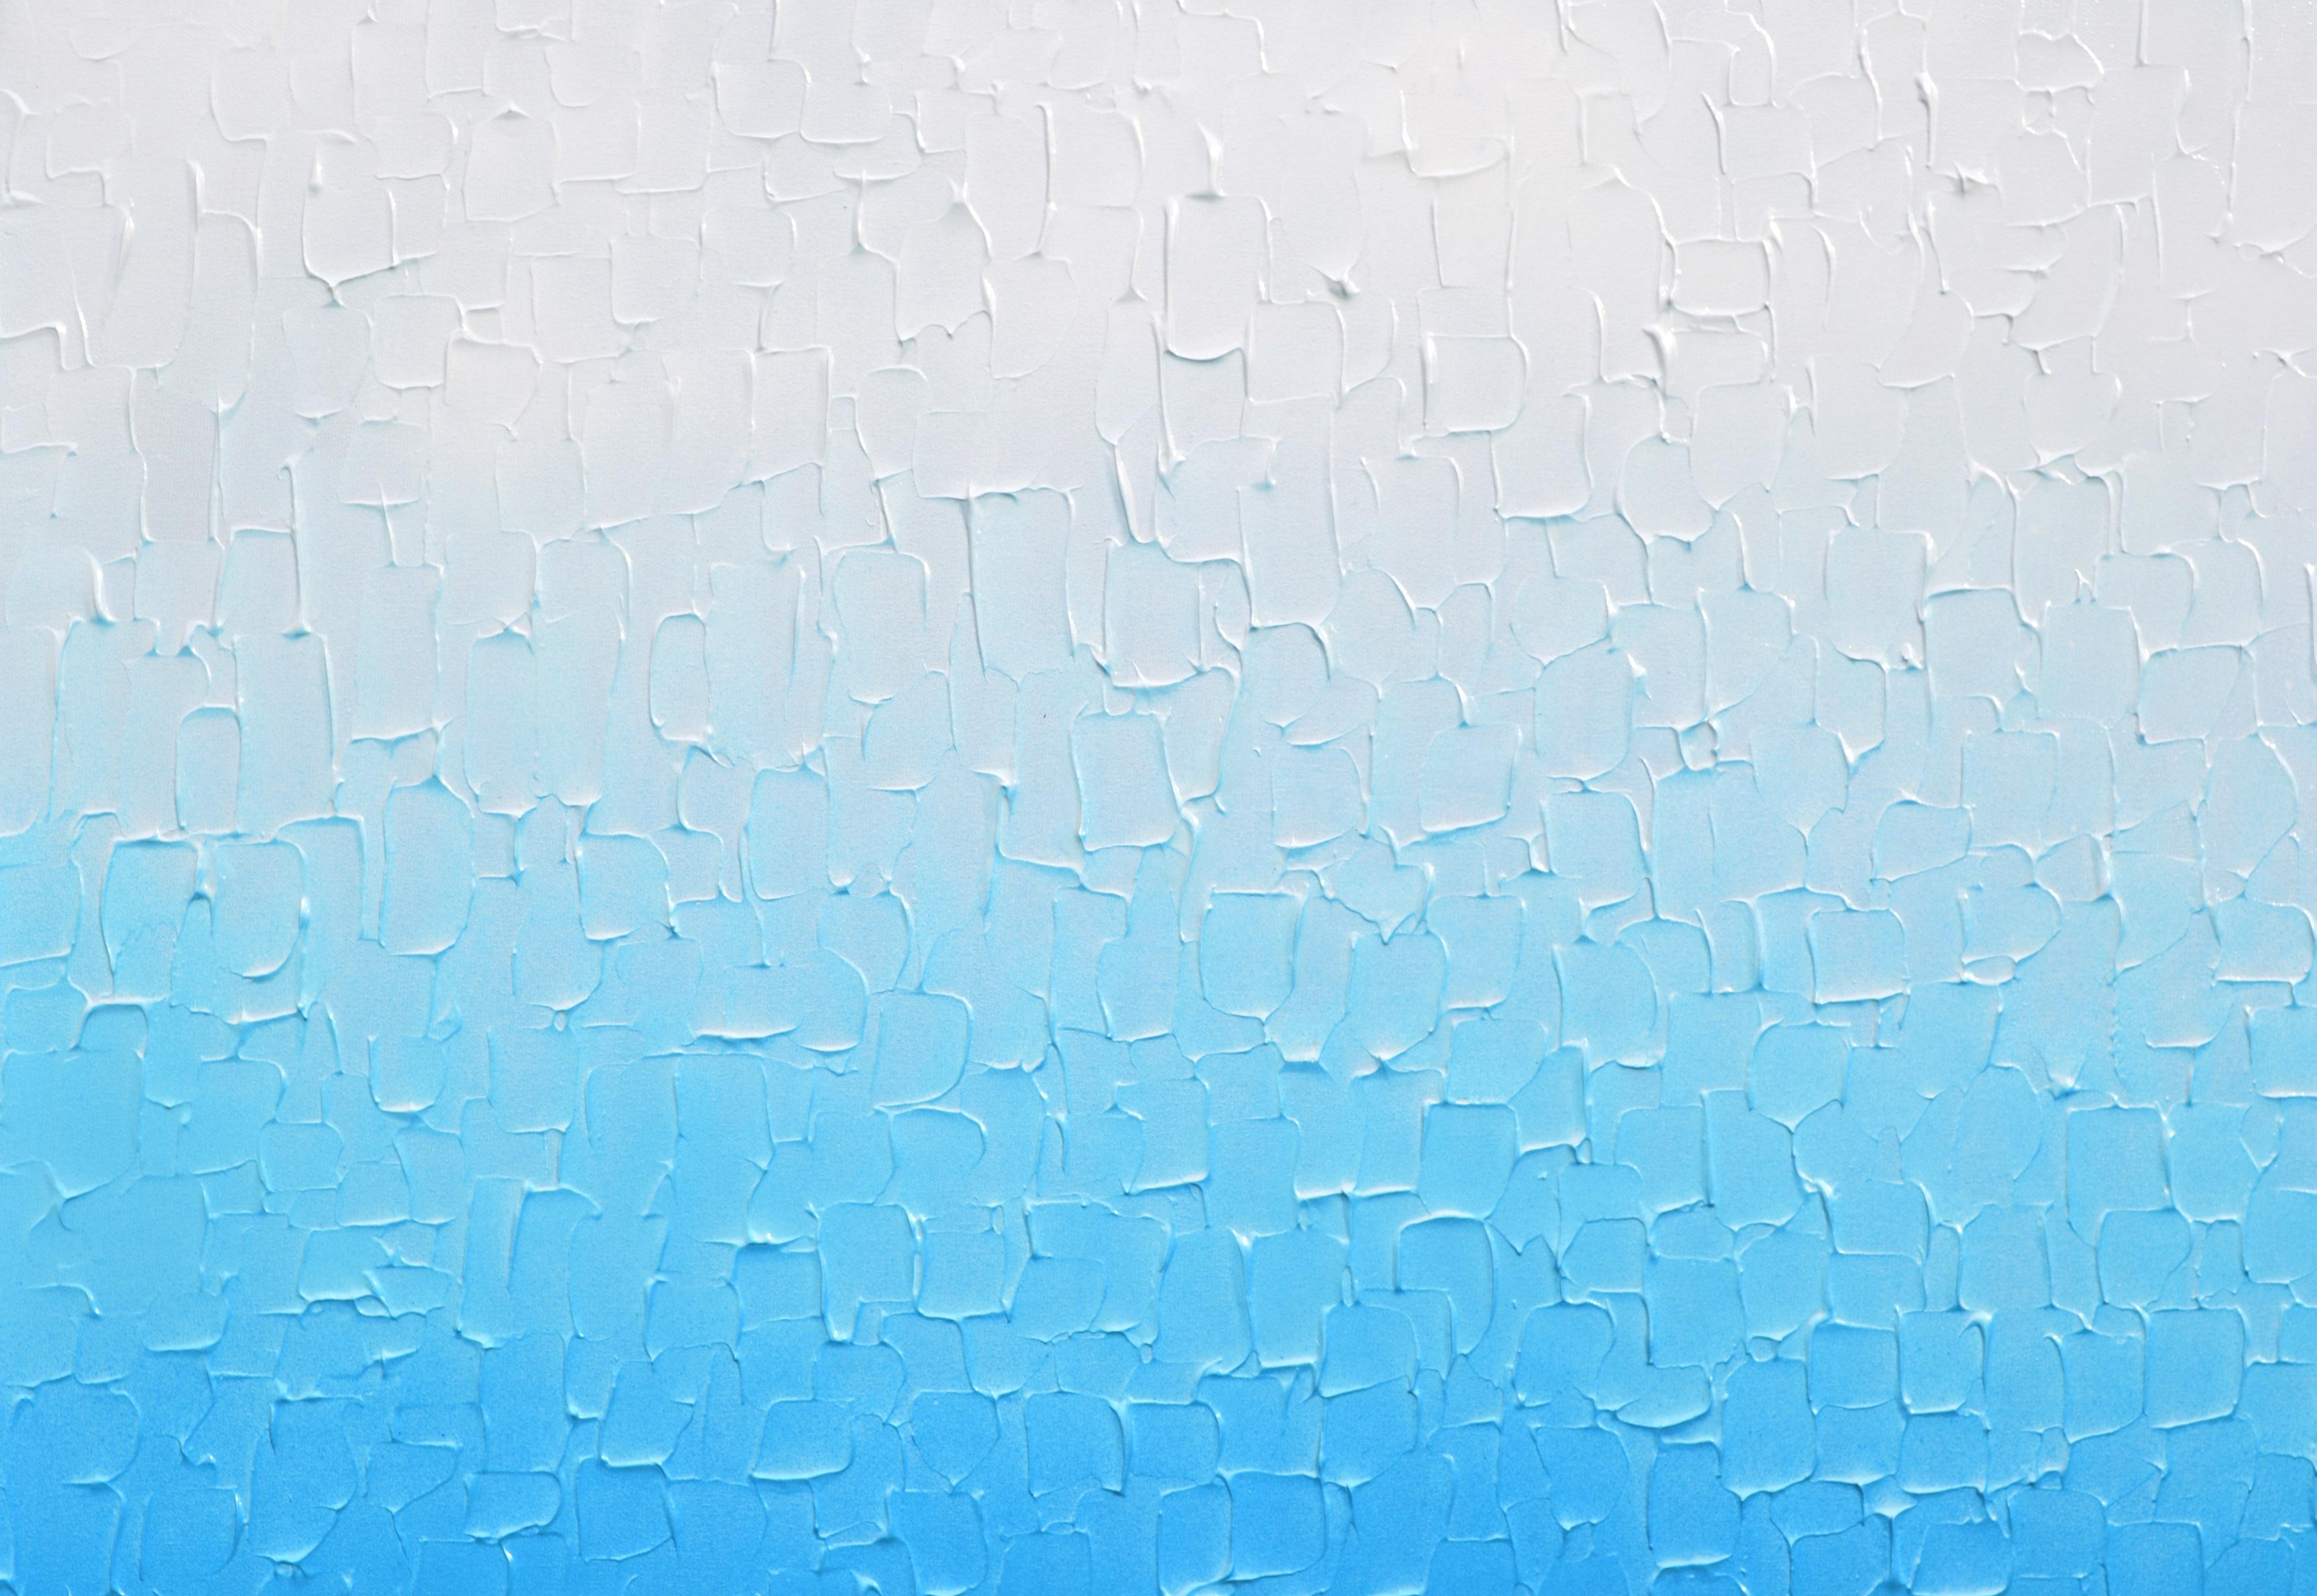 Tranquil XXII - Large Abstract Blue Gradient Painting For Sale 3